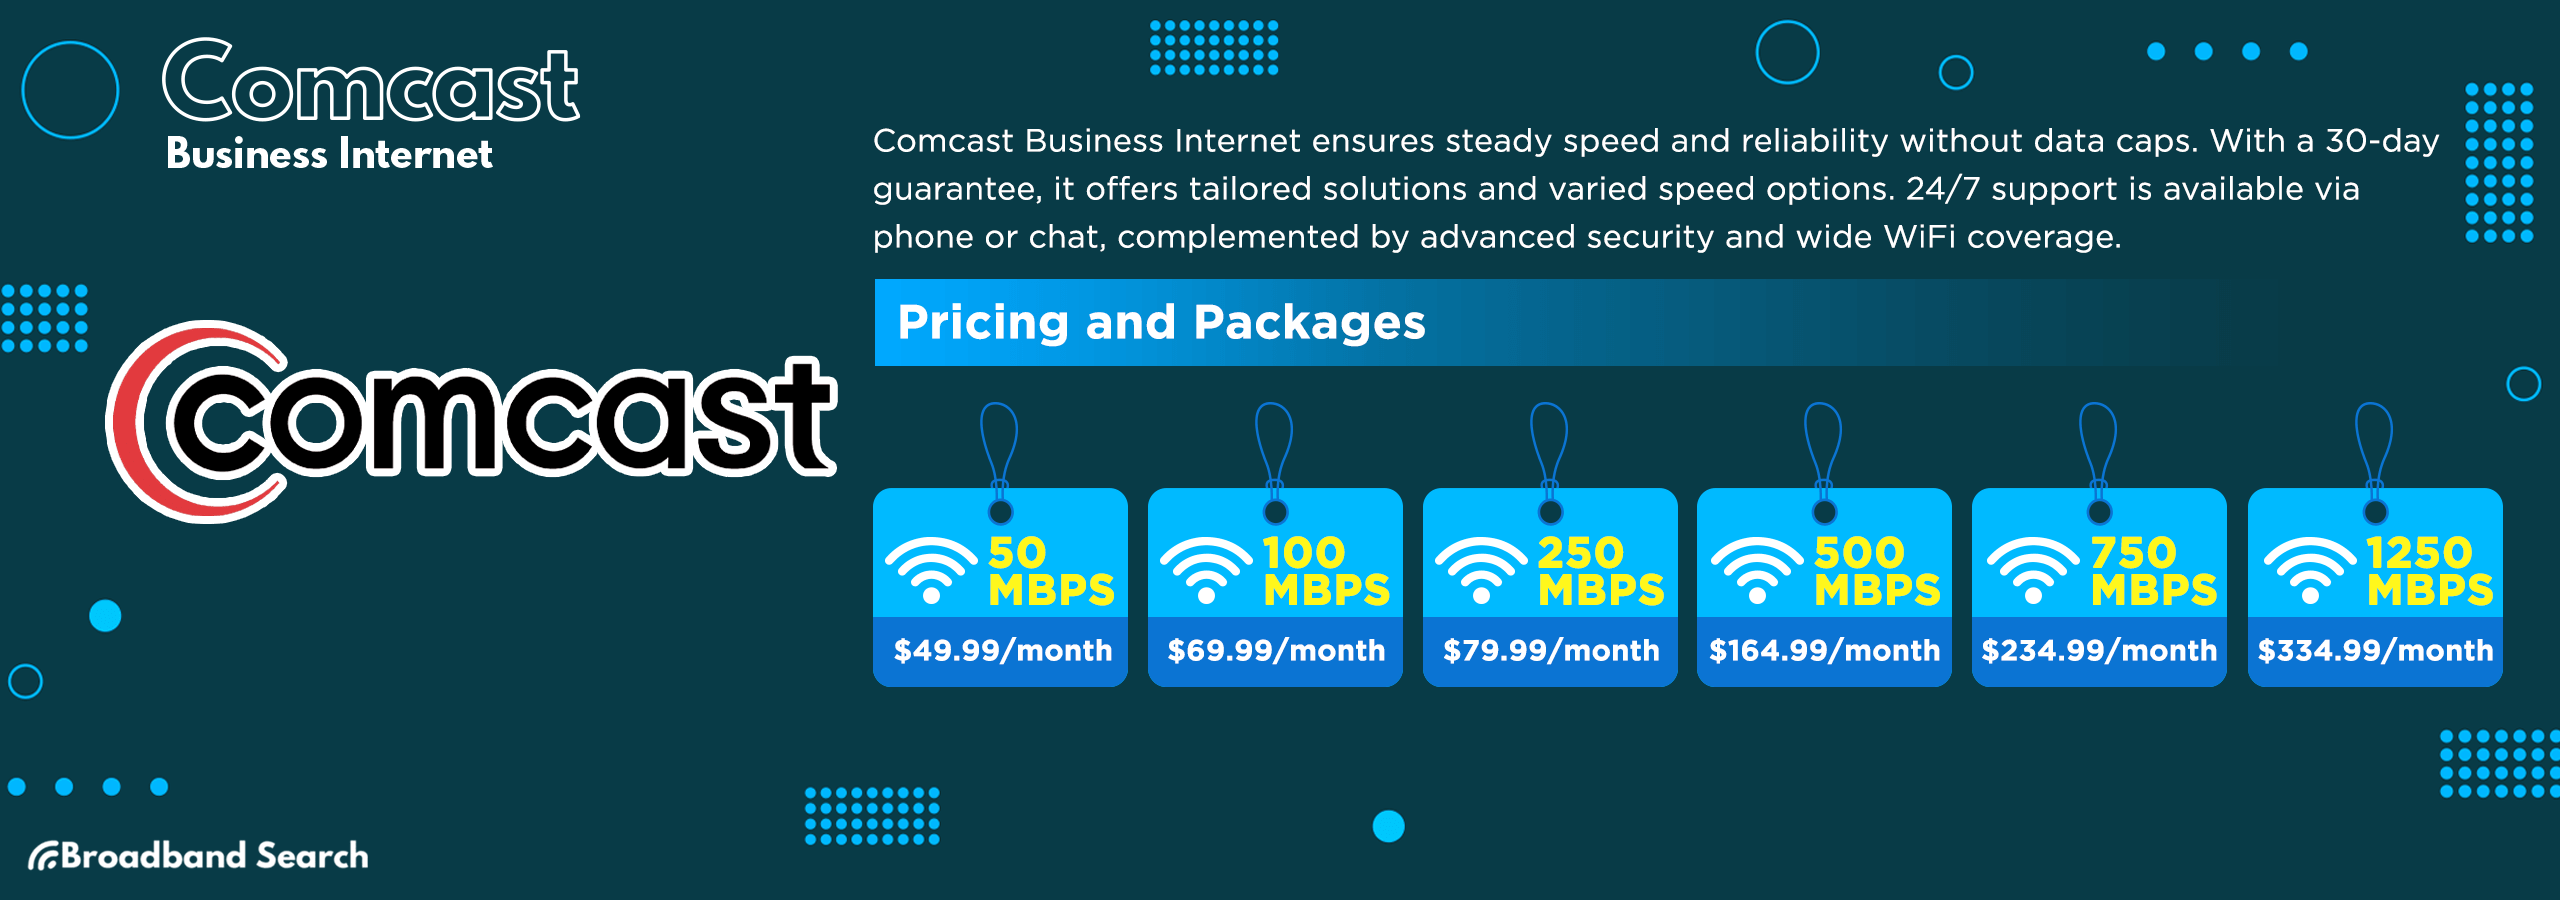 Comcast business internet plan details, pricing, and packages